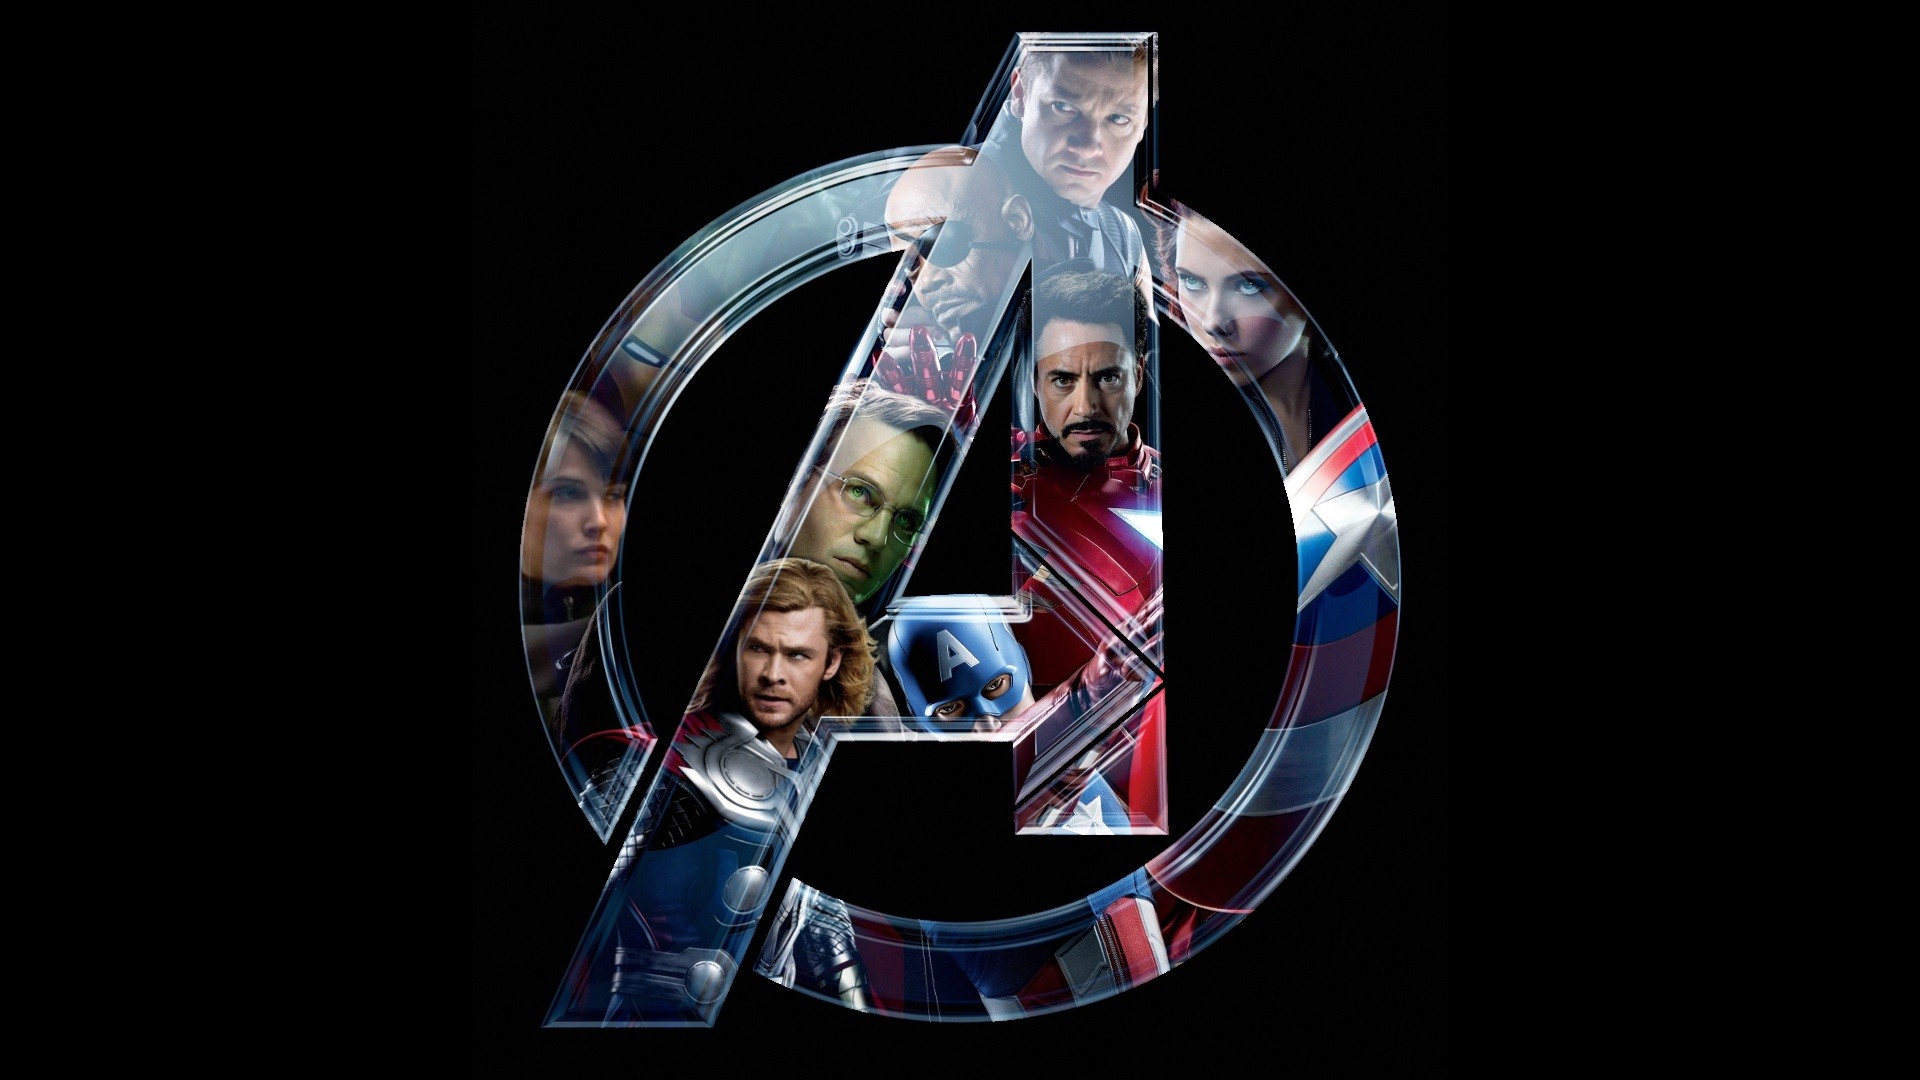 The Avengers 2012 HD wallpapers #3 - 1920x1080